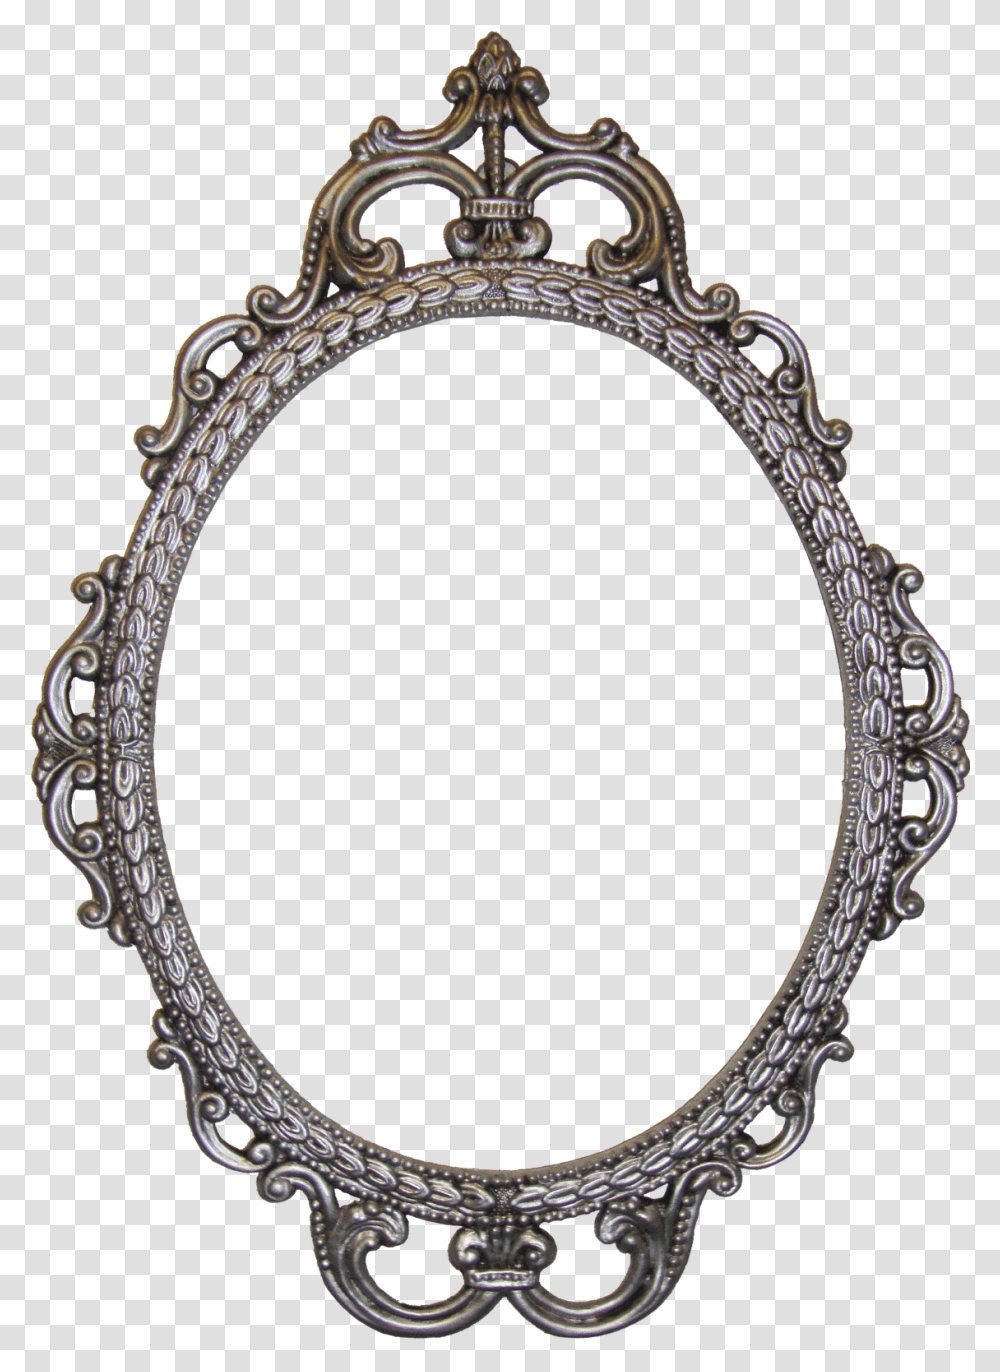 Mirror Free Download Thorpe Park, Oval, Bracelet, Jewelry, Accessories Transparent Png